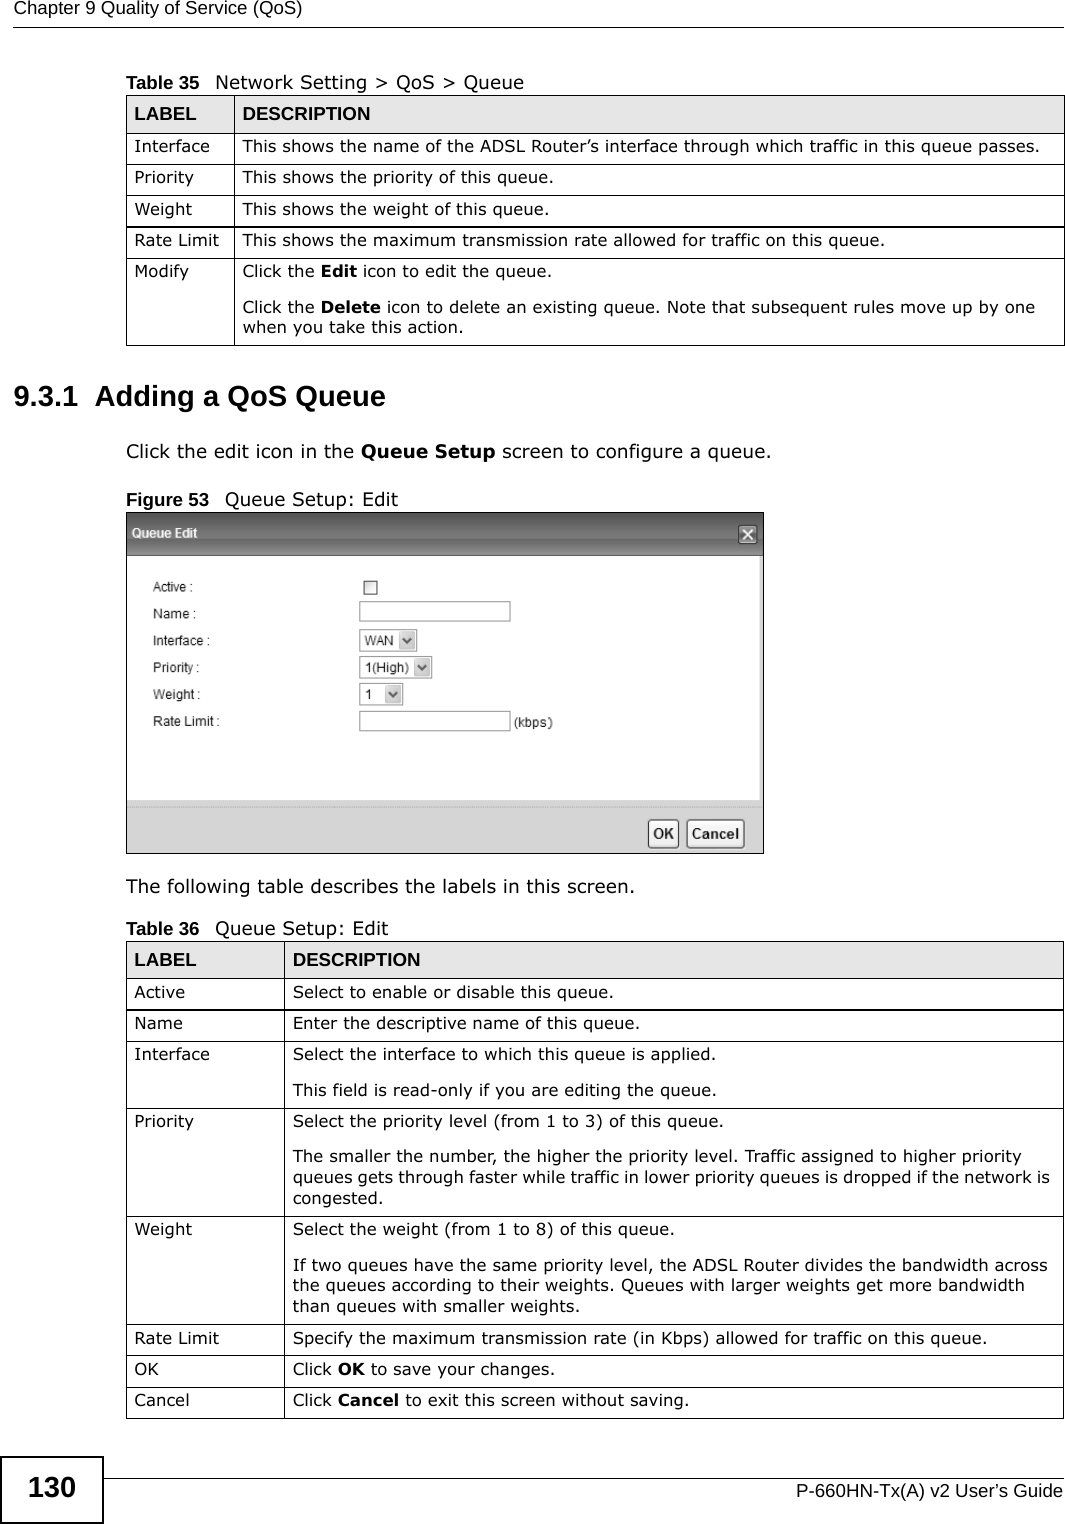 Chapter 9 Quality of Service (QoS)P-660HN-Tx(A) v2 User’s Guide1309.3.1  Adding a QoS Queue Click the edit icon in the Queue Setup screen to configure a queue. Figure 53   Queue Setup: Edit The following table describes the labels in this screen.  Interface This shows the name of the ADSL Router’s interface through which traffic in this queue passes.Priority This shows the priority of this queue.Weight This shows the weight of this queue.Rate Limit This shows the maximum transmission rate allowed for traffic on this queue.Modify Click the Edit icon to edit the queue.Click the Delete icon to delete an existing queue. Note that subsequent rules move up by one when you take this action.Table 35   Network Setting &gt; QoS &gt; QueueLABEL DESCRIPTIONTable 36   Queue Setup: EditLABEL DESCRIPTIONActive Select to enable or disable this queue.Name Enter the descriptive name of this queue.Interface Select the interface to which this queue is applied.This field is read-only if you are editing the queue.Priority Select the priority level (from 1 to 3) of this queue.The smaller the number, the higher the priority level. Traffic assigned to higher priority queues gets through faster while traffic in lower priority queues is dropped if the network is congested.Weight Select the weight (from 1 to 8) of this queue. If two queues have the same priority level, the ADSL Router divides the bandwidth across the queues according to their weights. Queues with larger weights get more bandwidth than queues with smaller weights.Rate Limit Specify the maximum transmission rate (in Kbps) allowed for traffic on this queue.OK Click OK to save your changes.Cancel Click Cancel to exit this screen without saving.